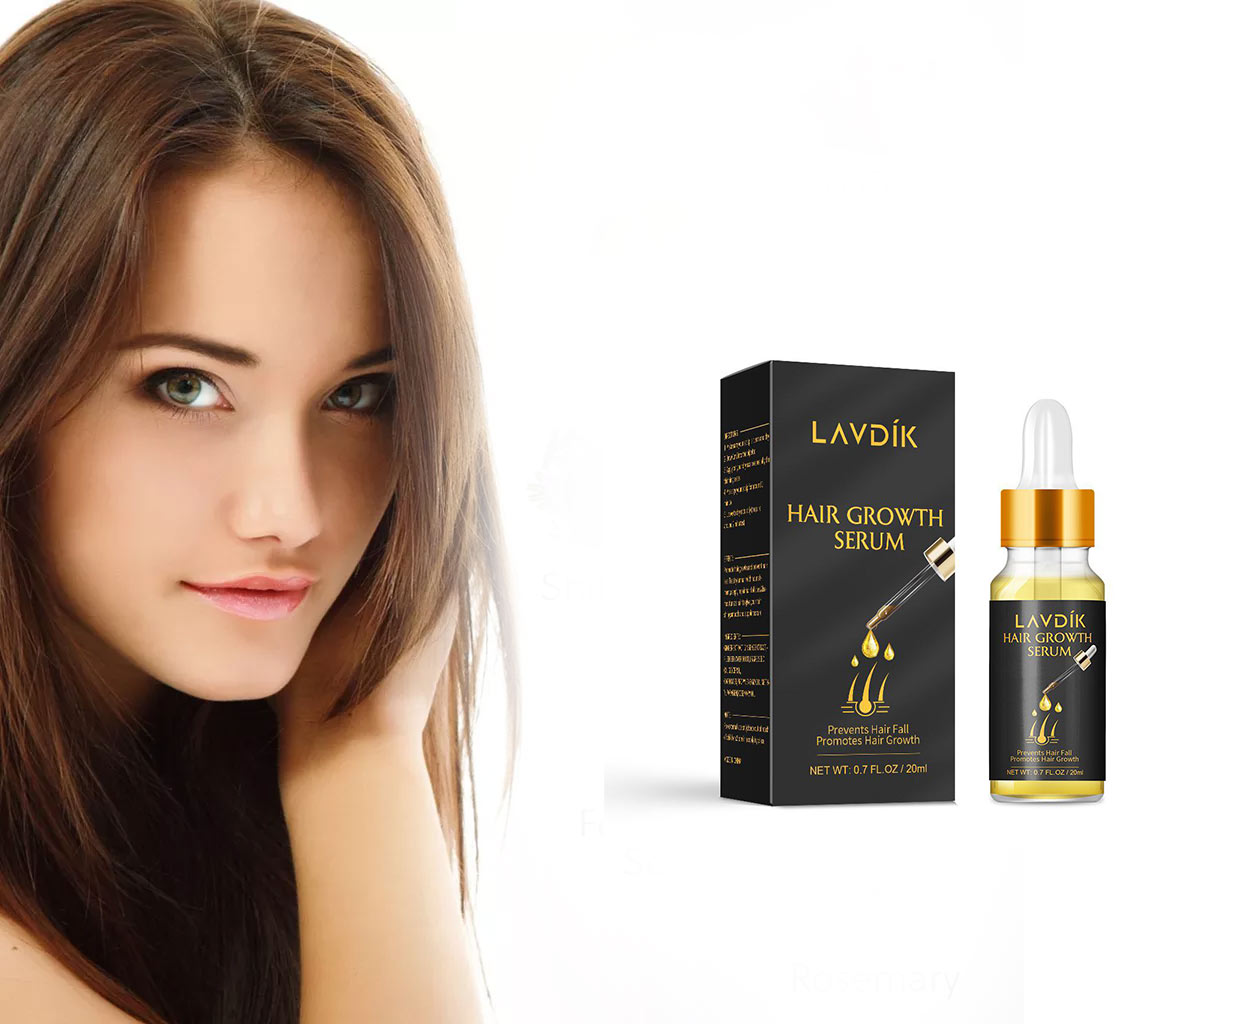 LAVDIK Hair Growth Serum for Better Health and Confidence - Steemit.